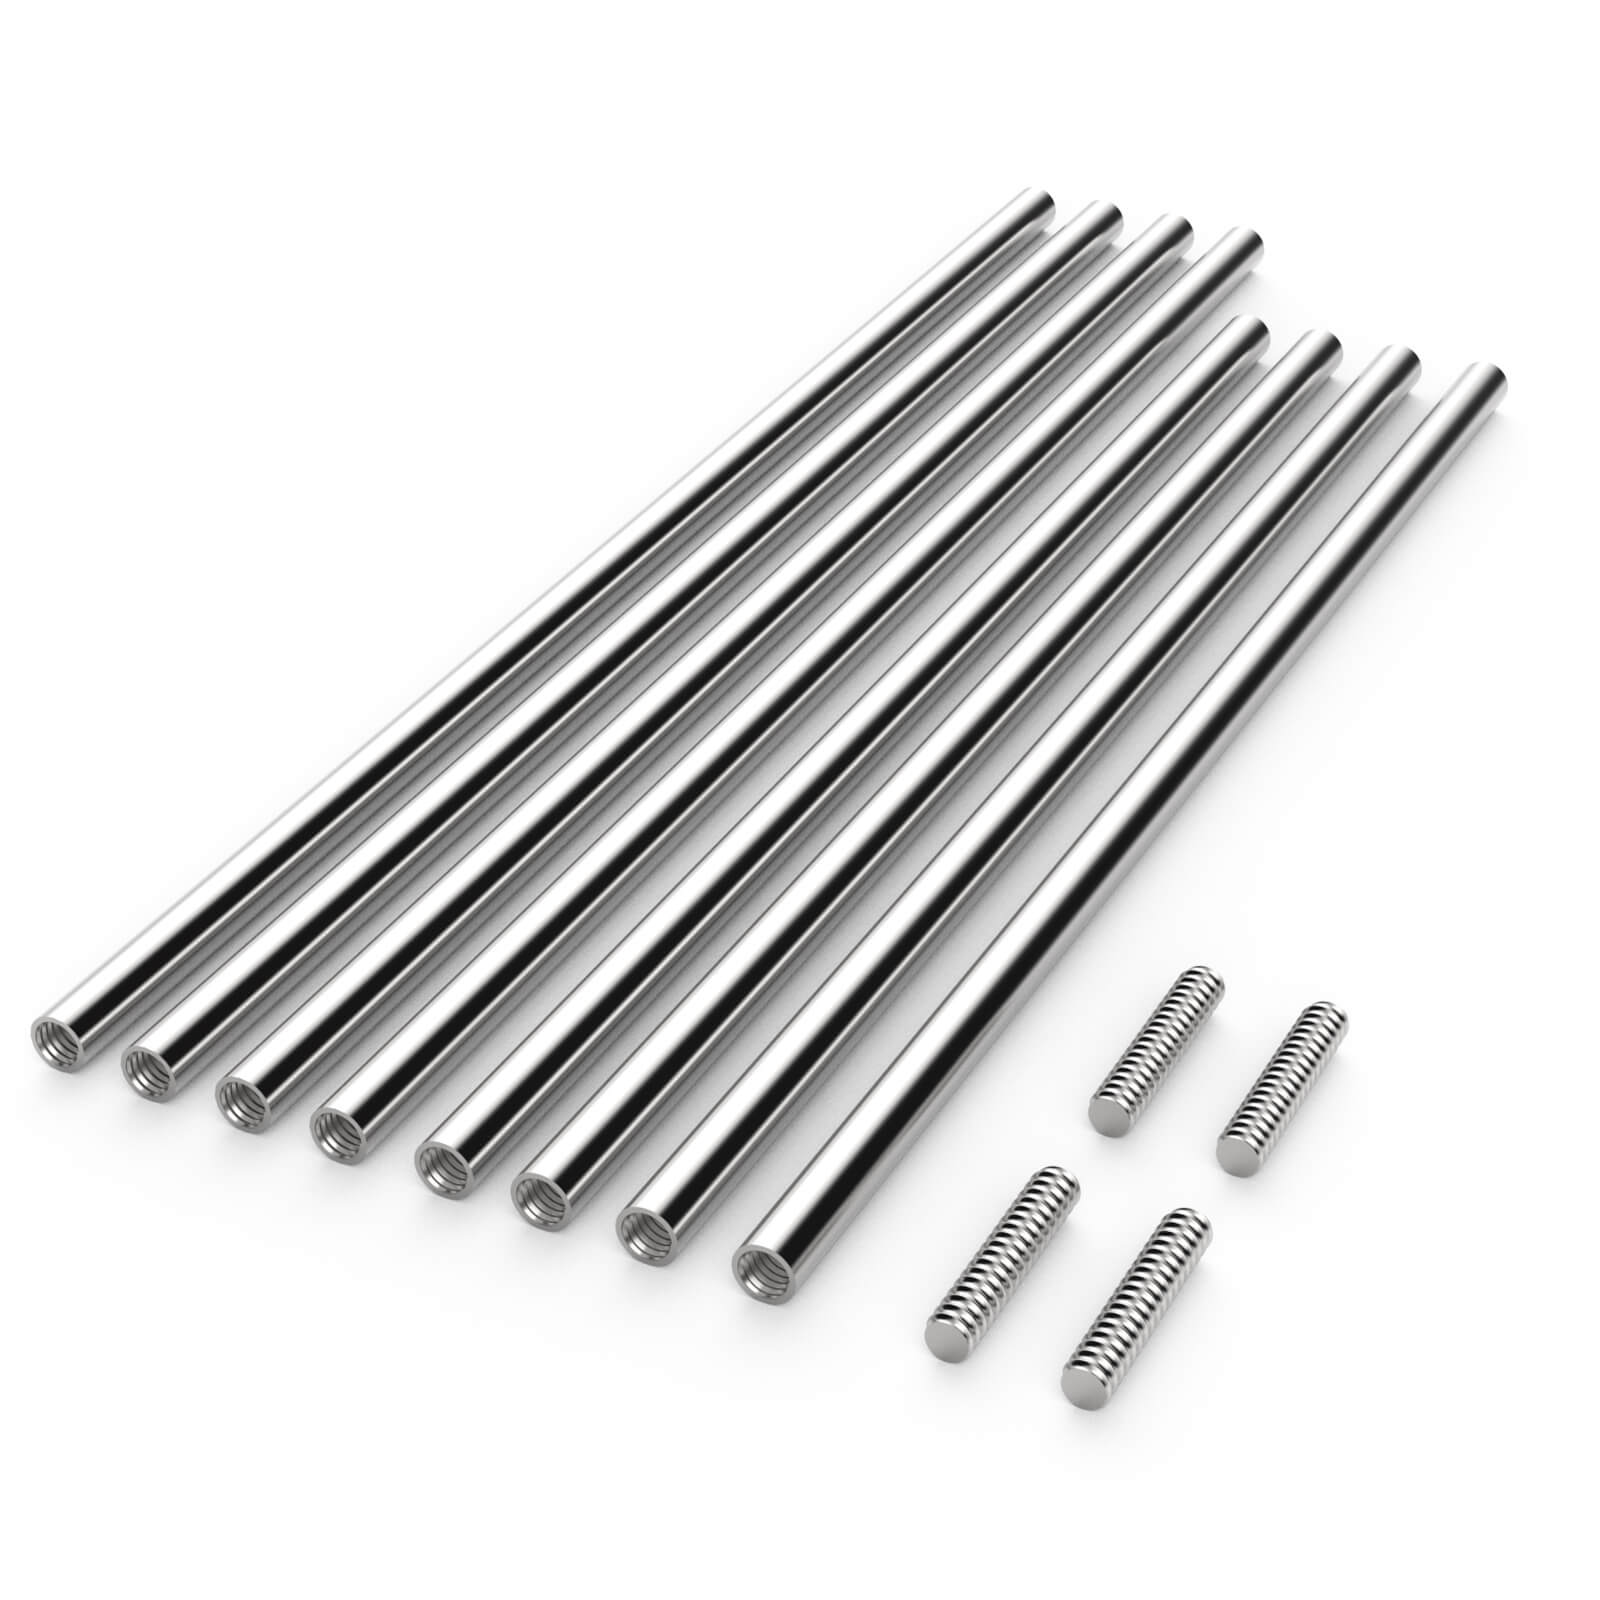 Olle Gardens Anti-corrosion Aluminum Support Rods-4 Pack